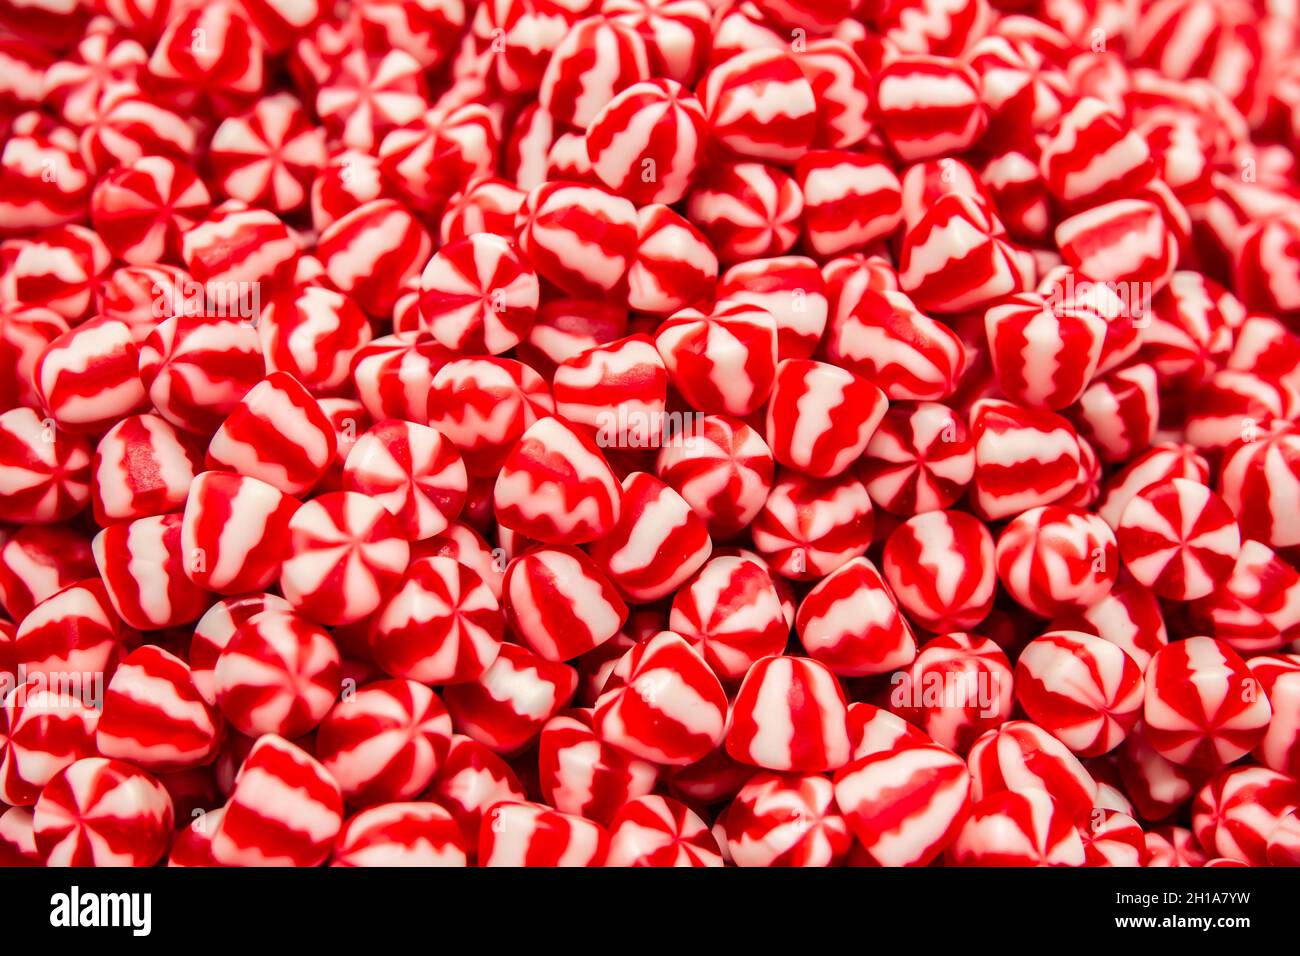 Bright red and white gummies, top view. Stock Photo